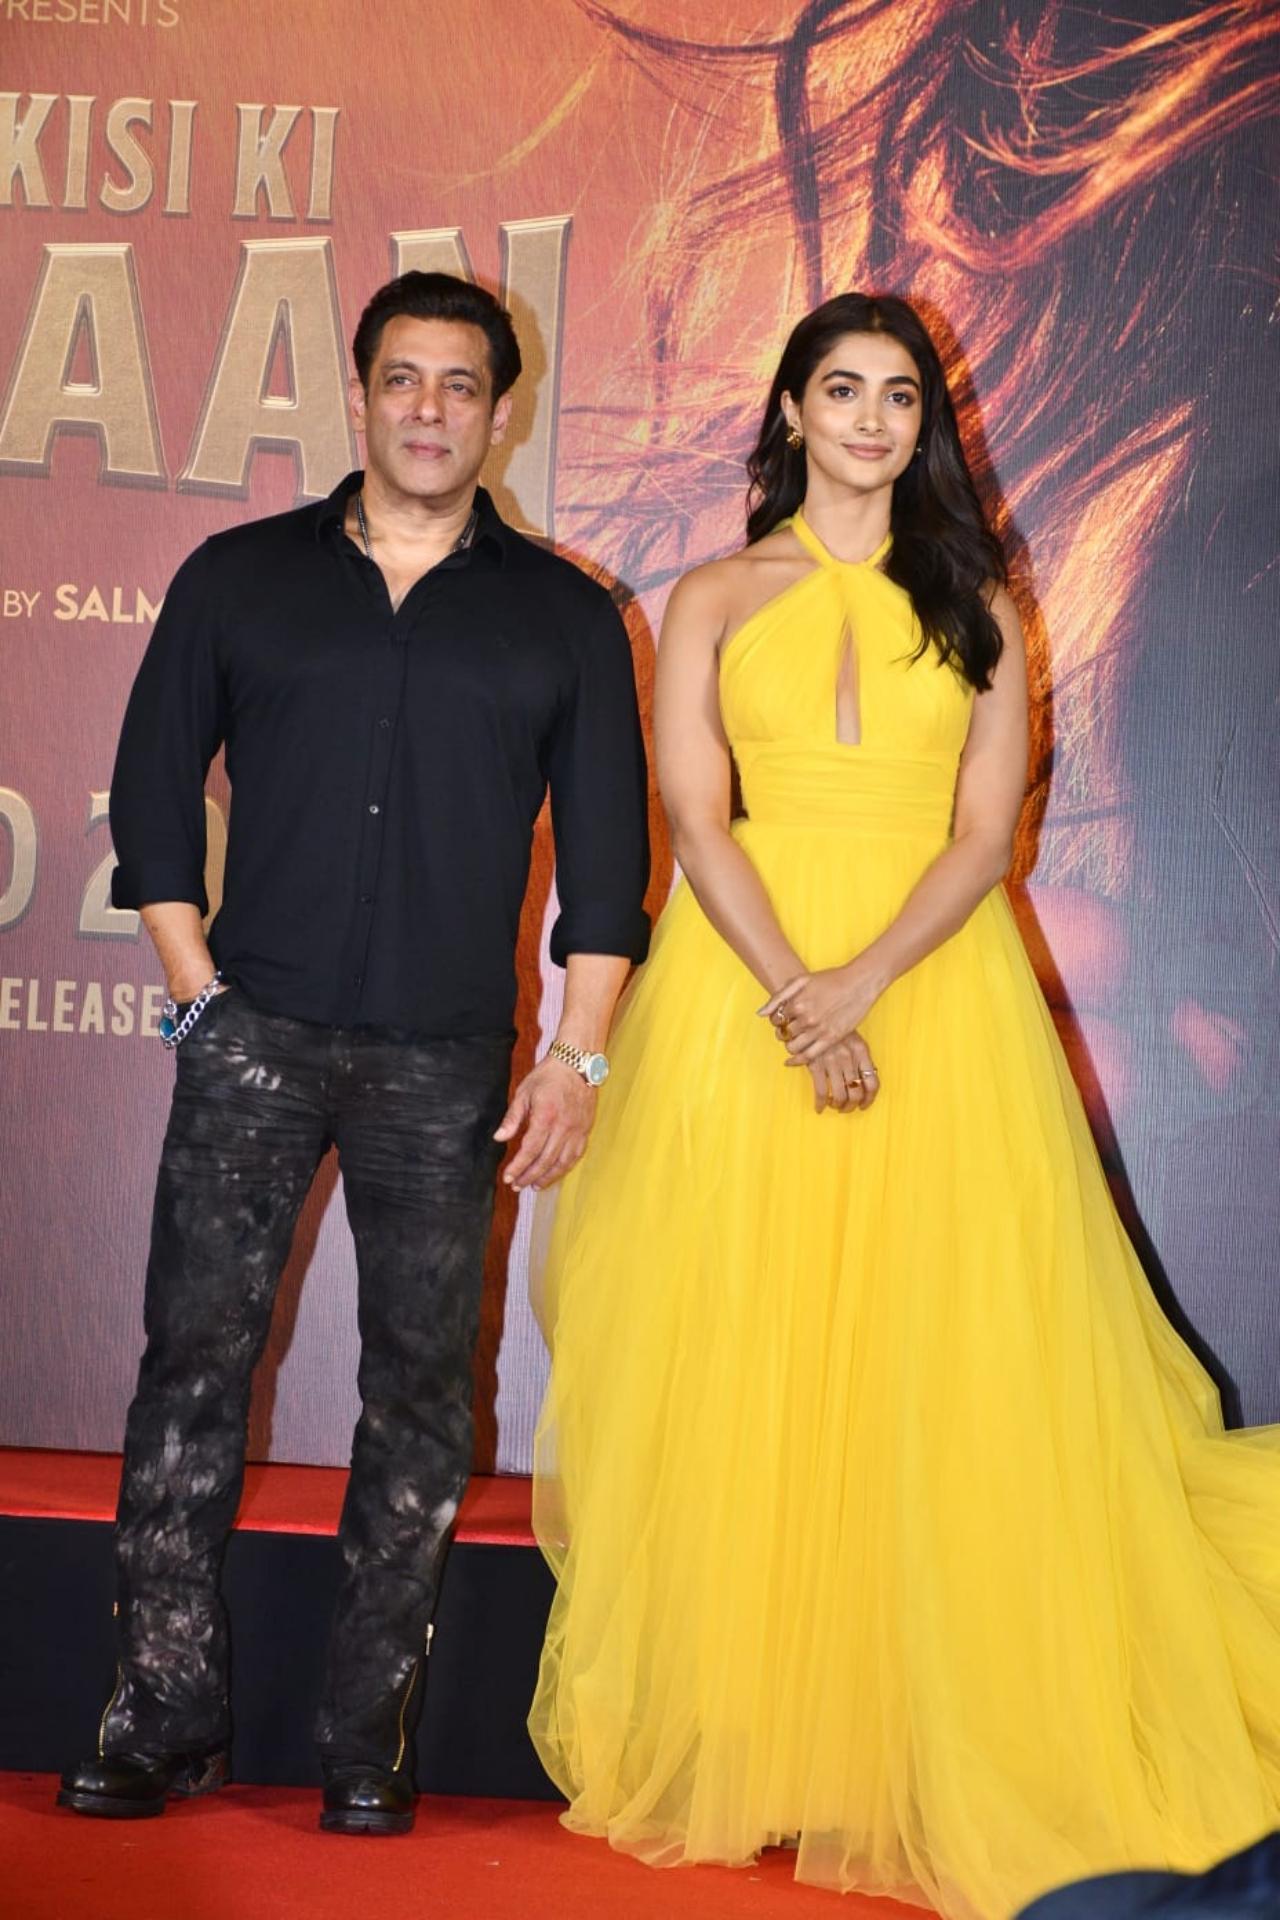 The romance between Salman and his leading lady, Pooja Hegde has a simplistic vibe, which comes across as a breeze of fresh air. But soon, the trailer indicates that the film is the the most 'face-breaking, bone-cracking, neck-twisting, hammer-hitting action entertainer you will ever experience'.